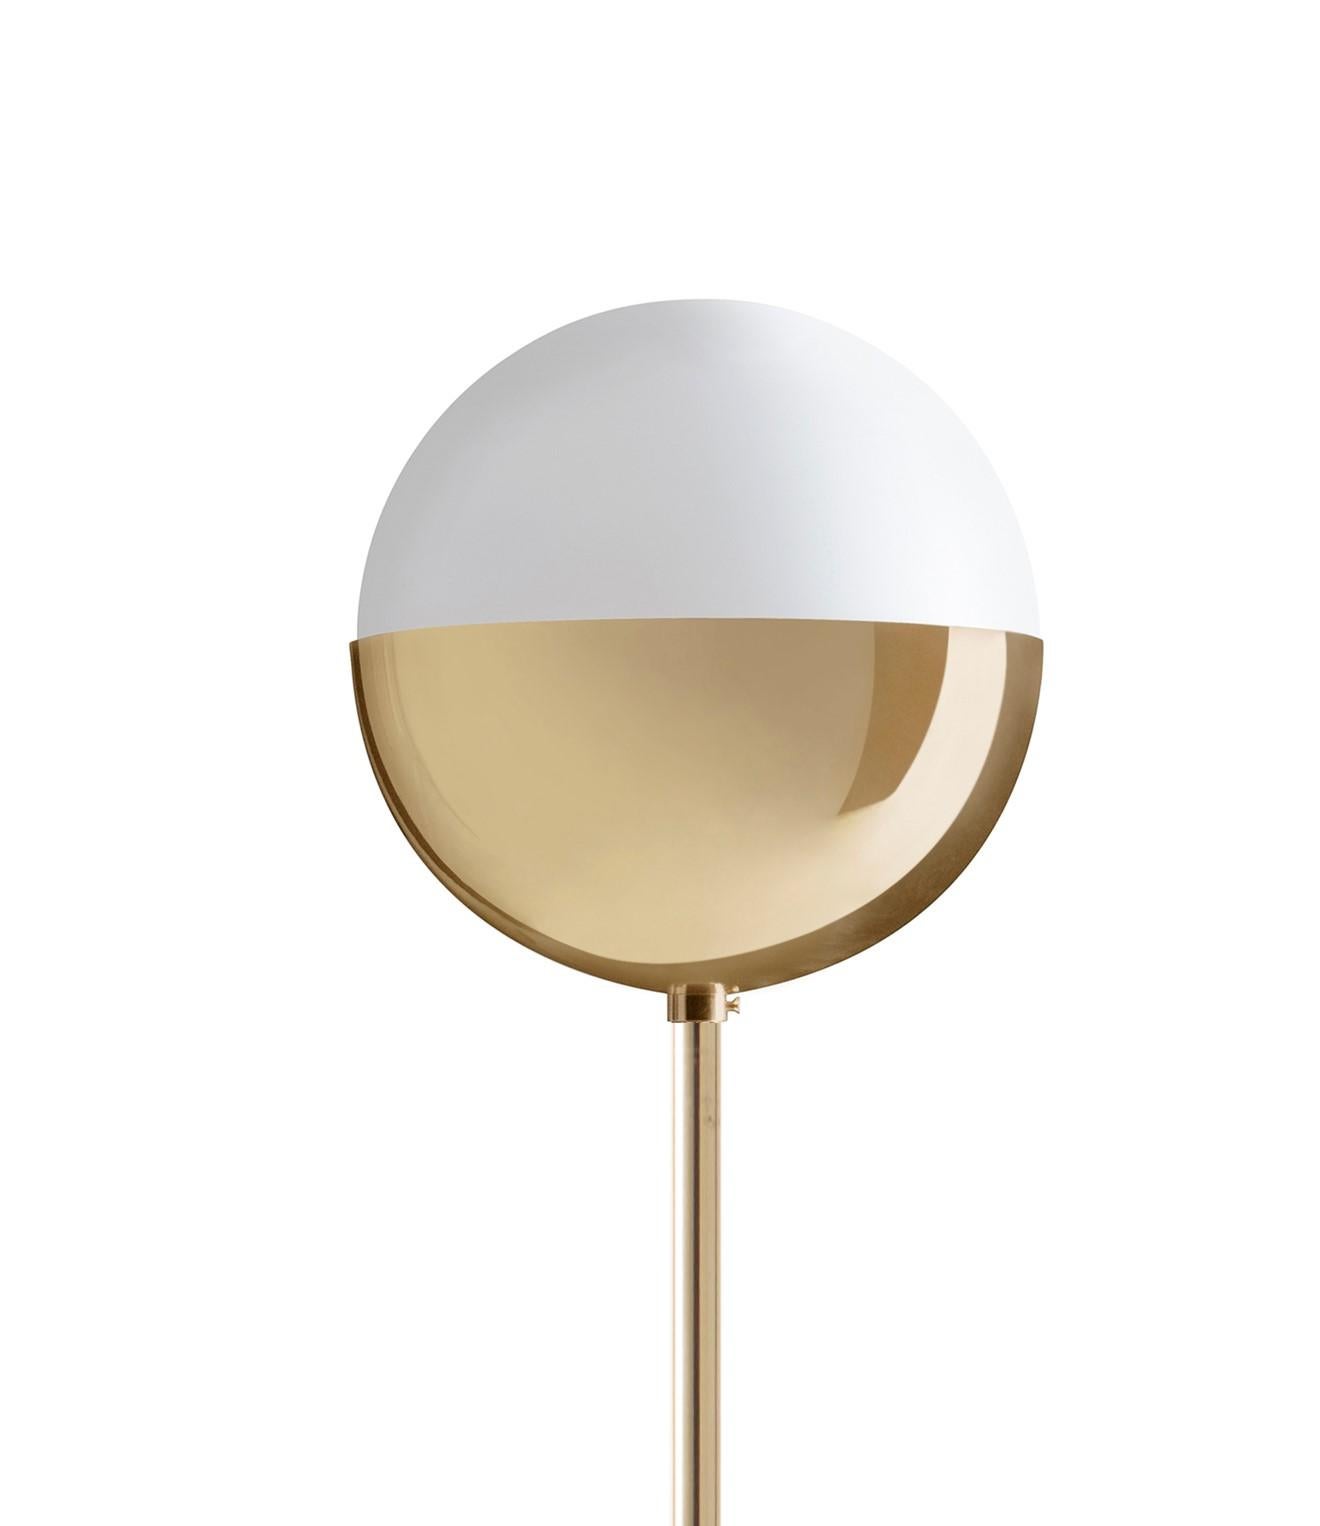 Brass floor lamp 01 by Magic Circus Editions
Dimensions: D 25 x H 150 cm
Materials: Brass base, smooth brass tube, glossy mouth blown glass
Dimmable version available.


Rethinking, reimagining, redesigning familiar objects that we look at